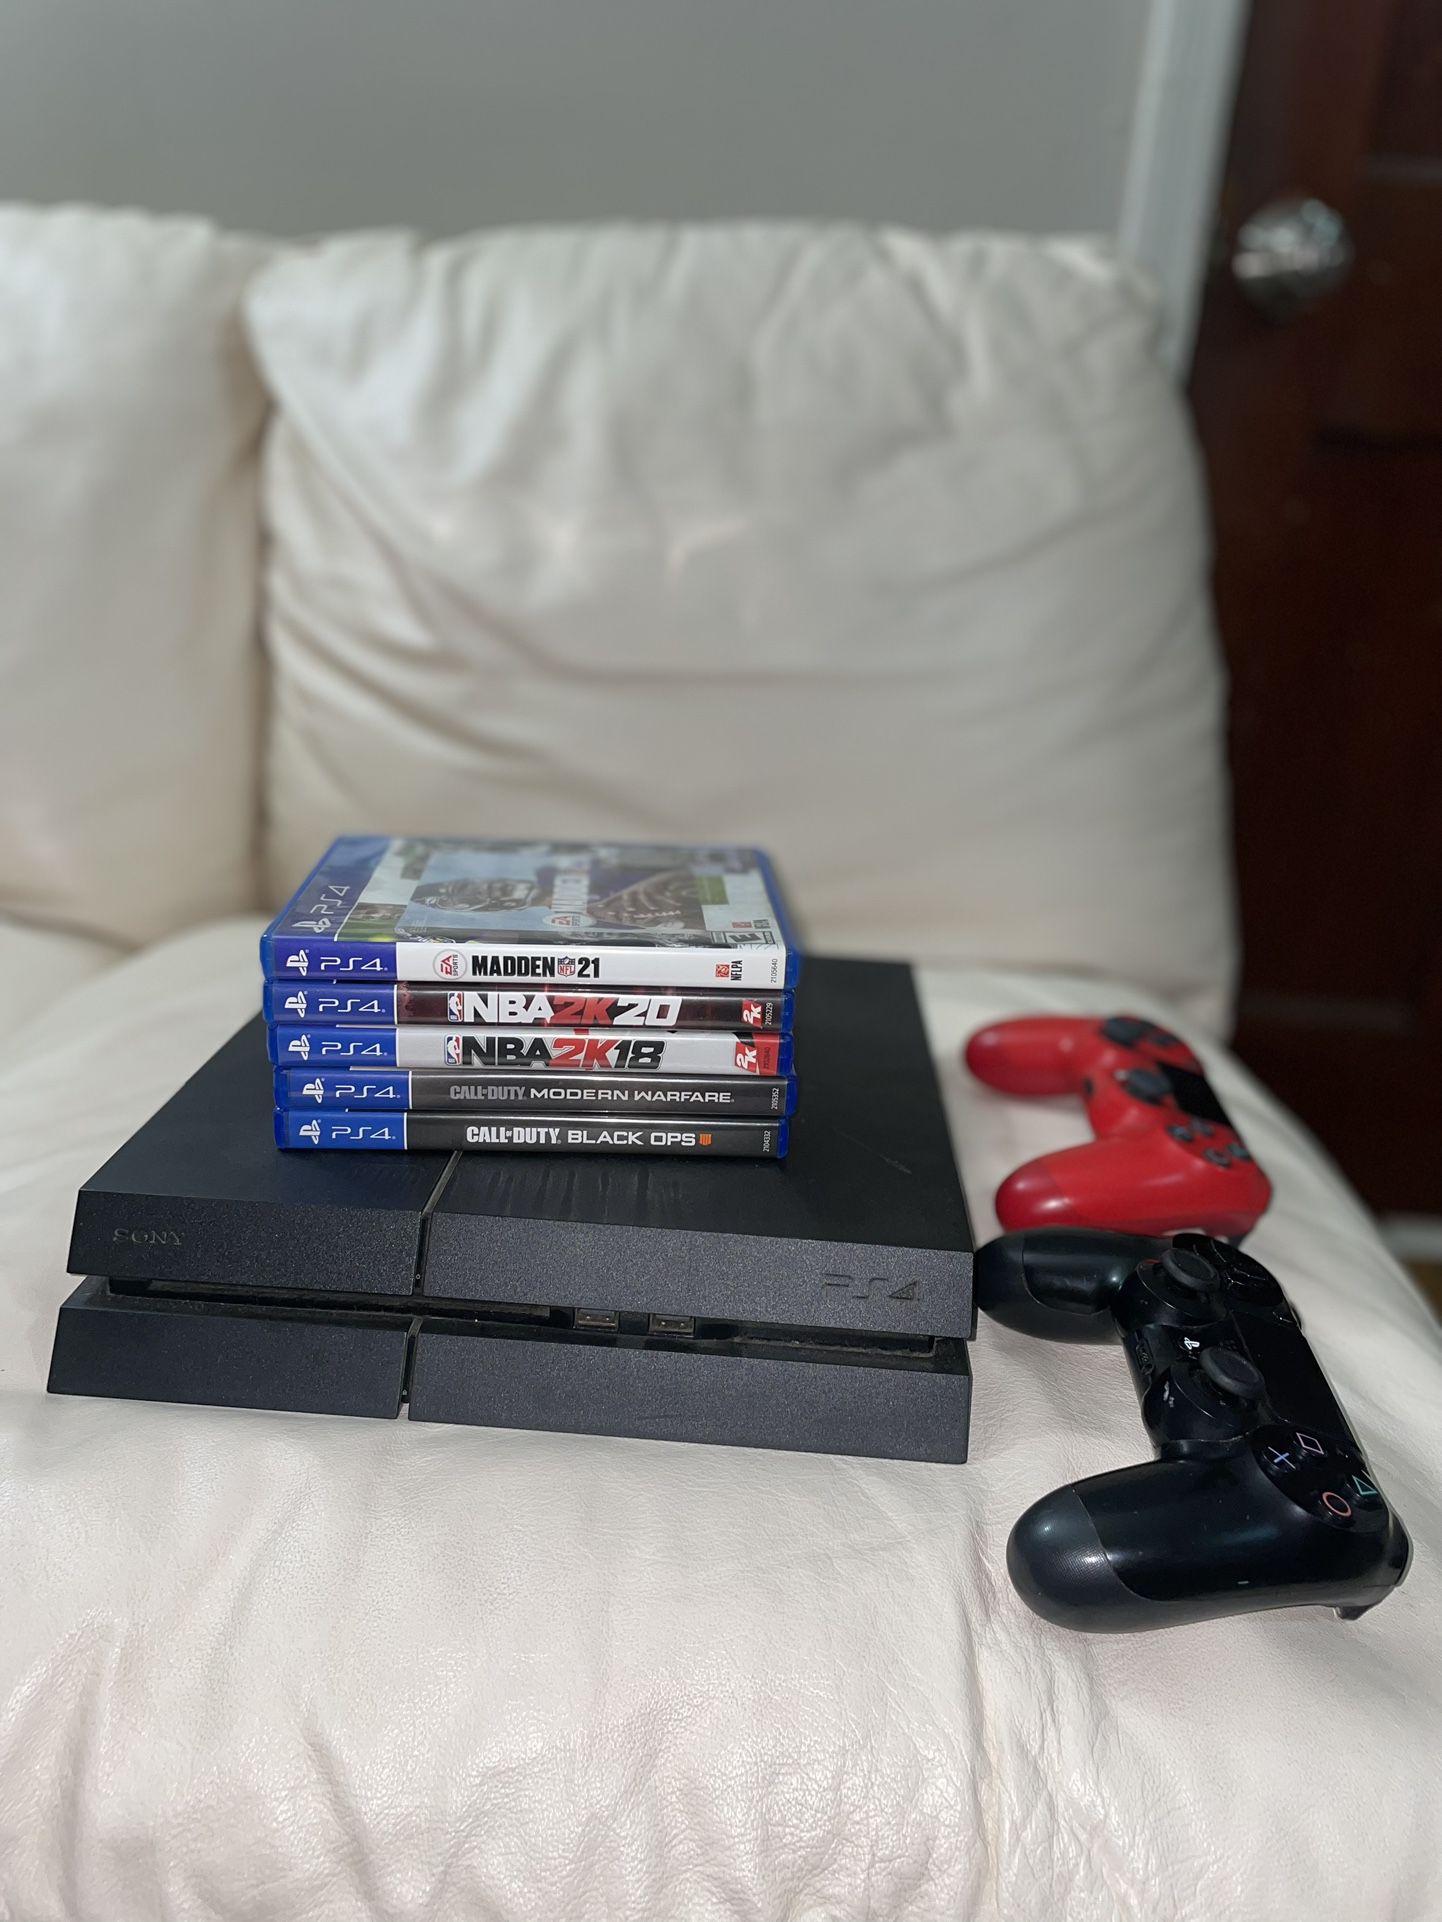 Ps4 and Games Bundle